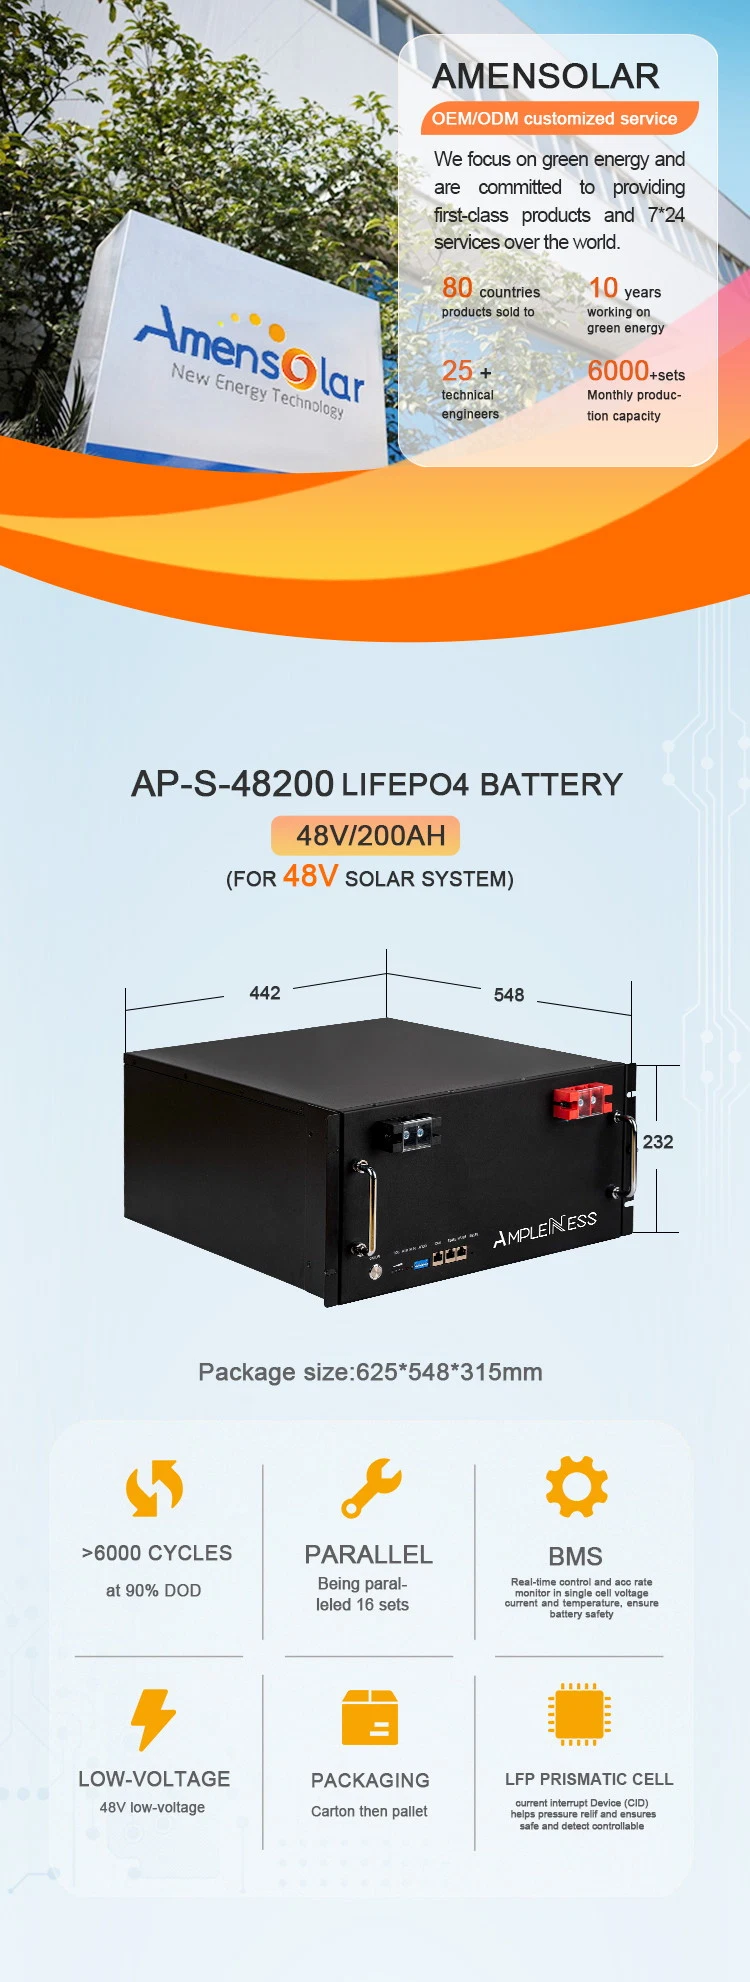 Ampleness Low Voltage Lifep04 with BMS Ap-S-48200 10kwh 48V 200ah Lithium Iron Phosphate Battery Solar